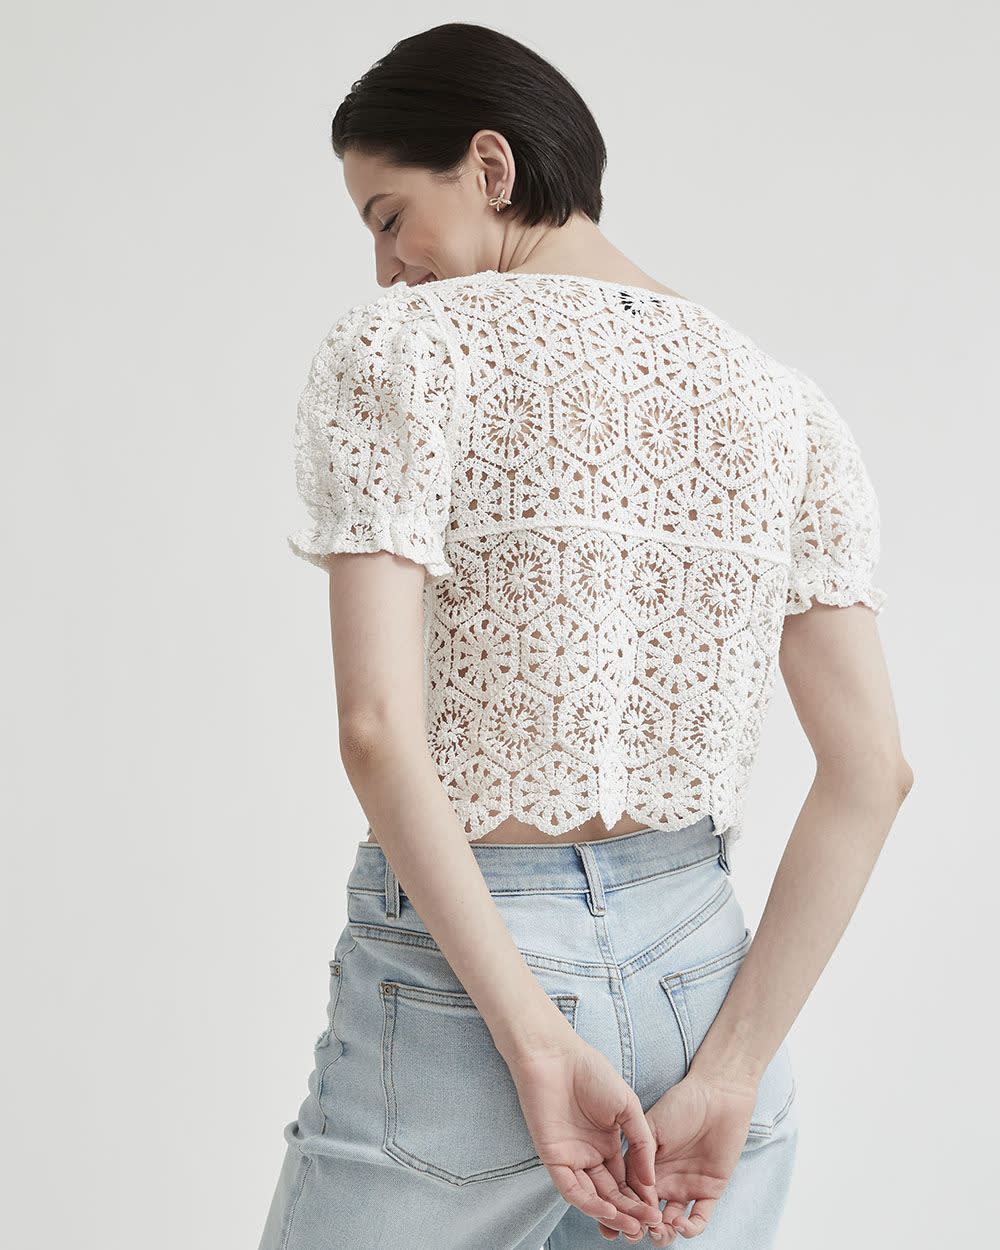 Crochet Top with Short Puffy Sleeves